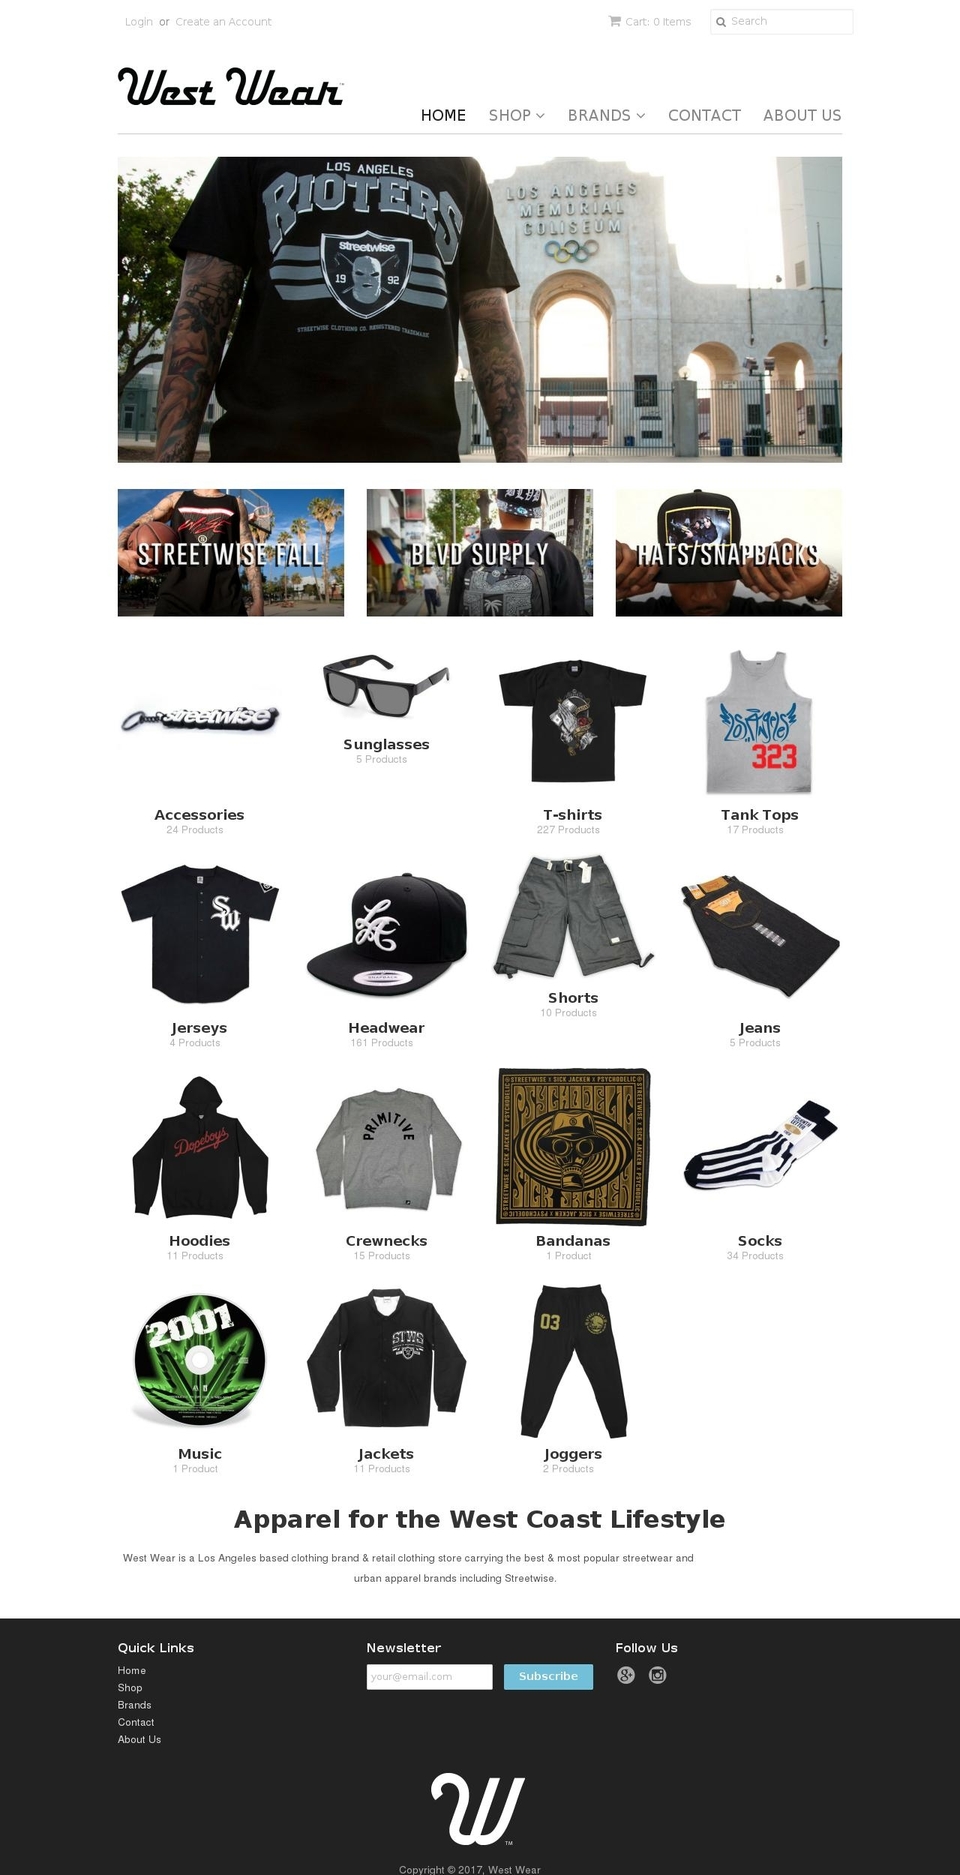 Boost Shopify theme site example westwear.com